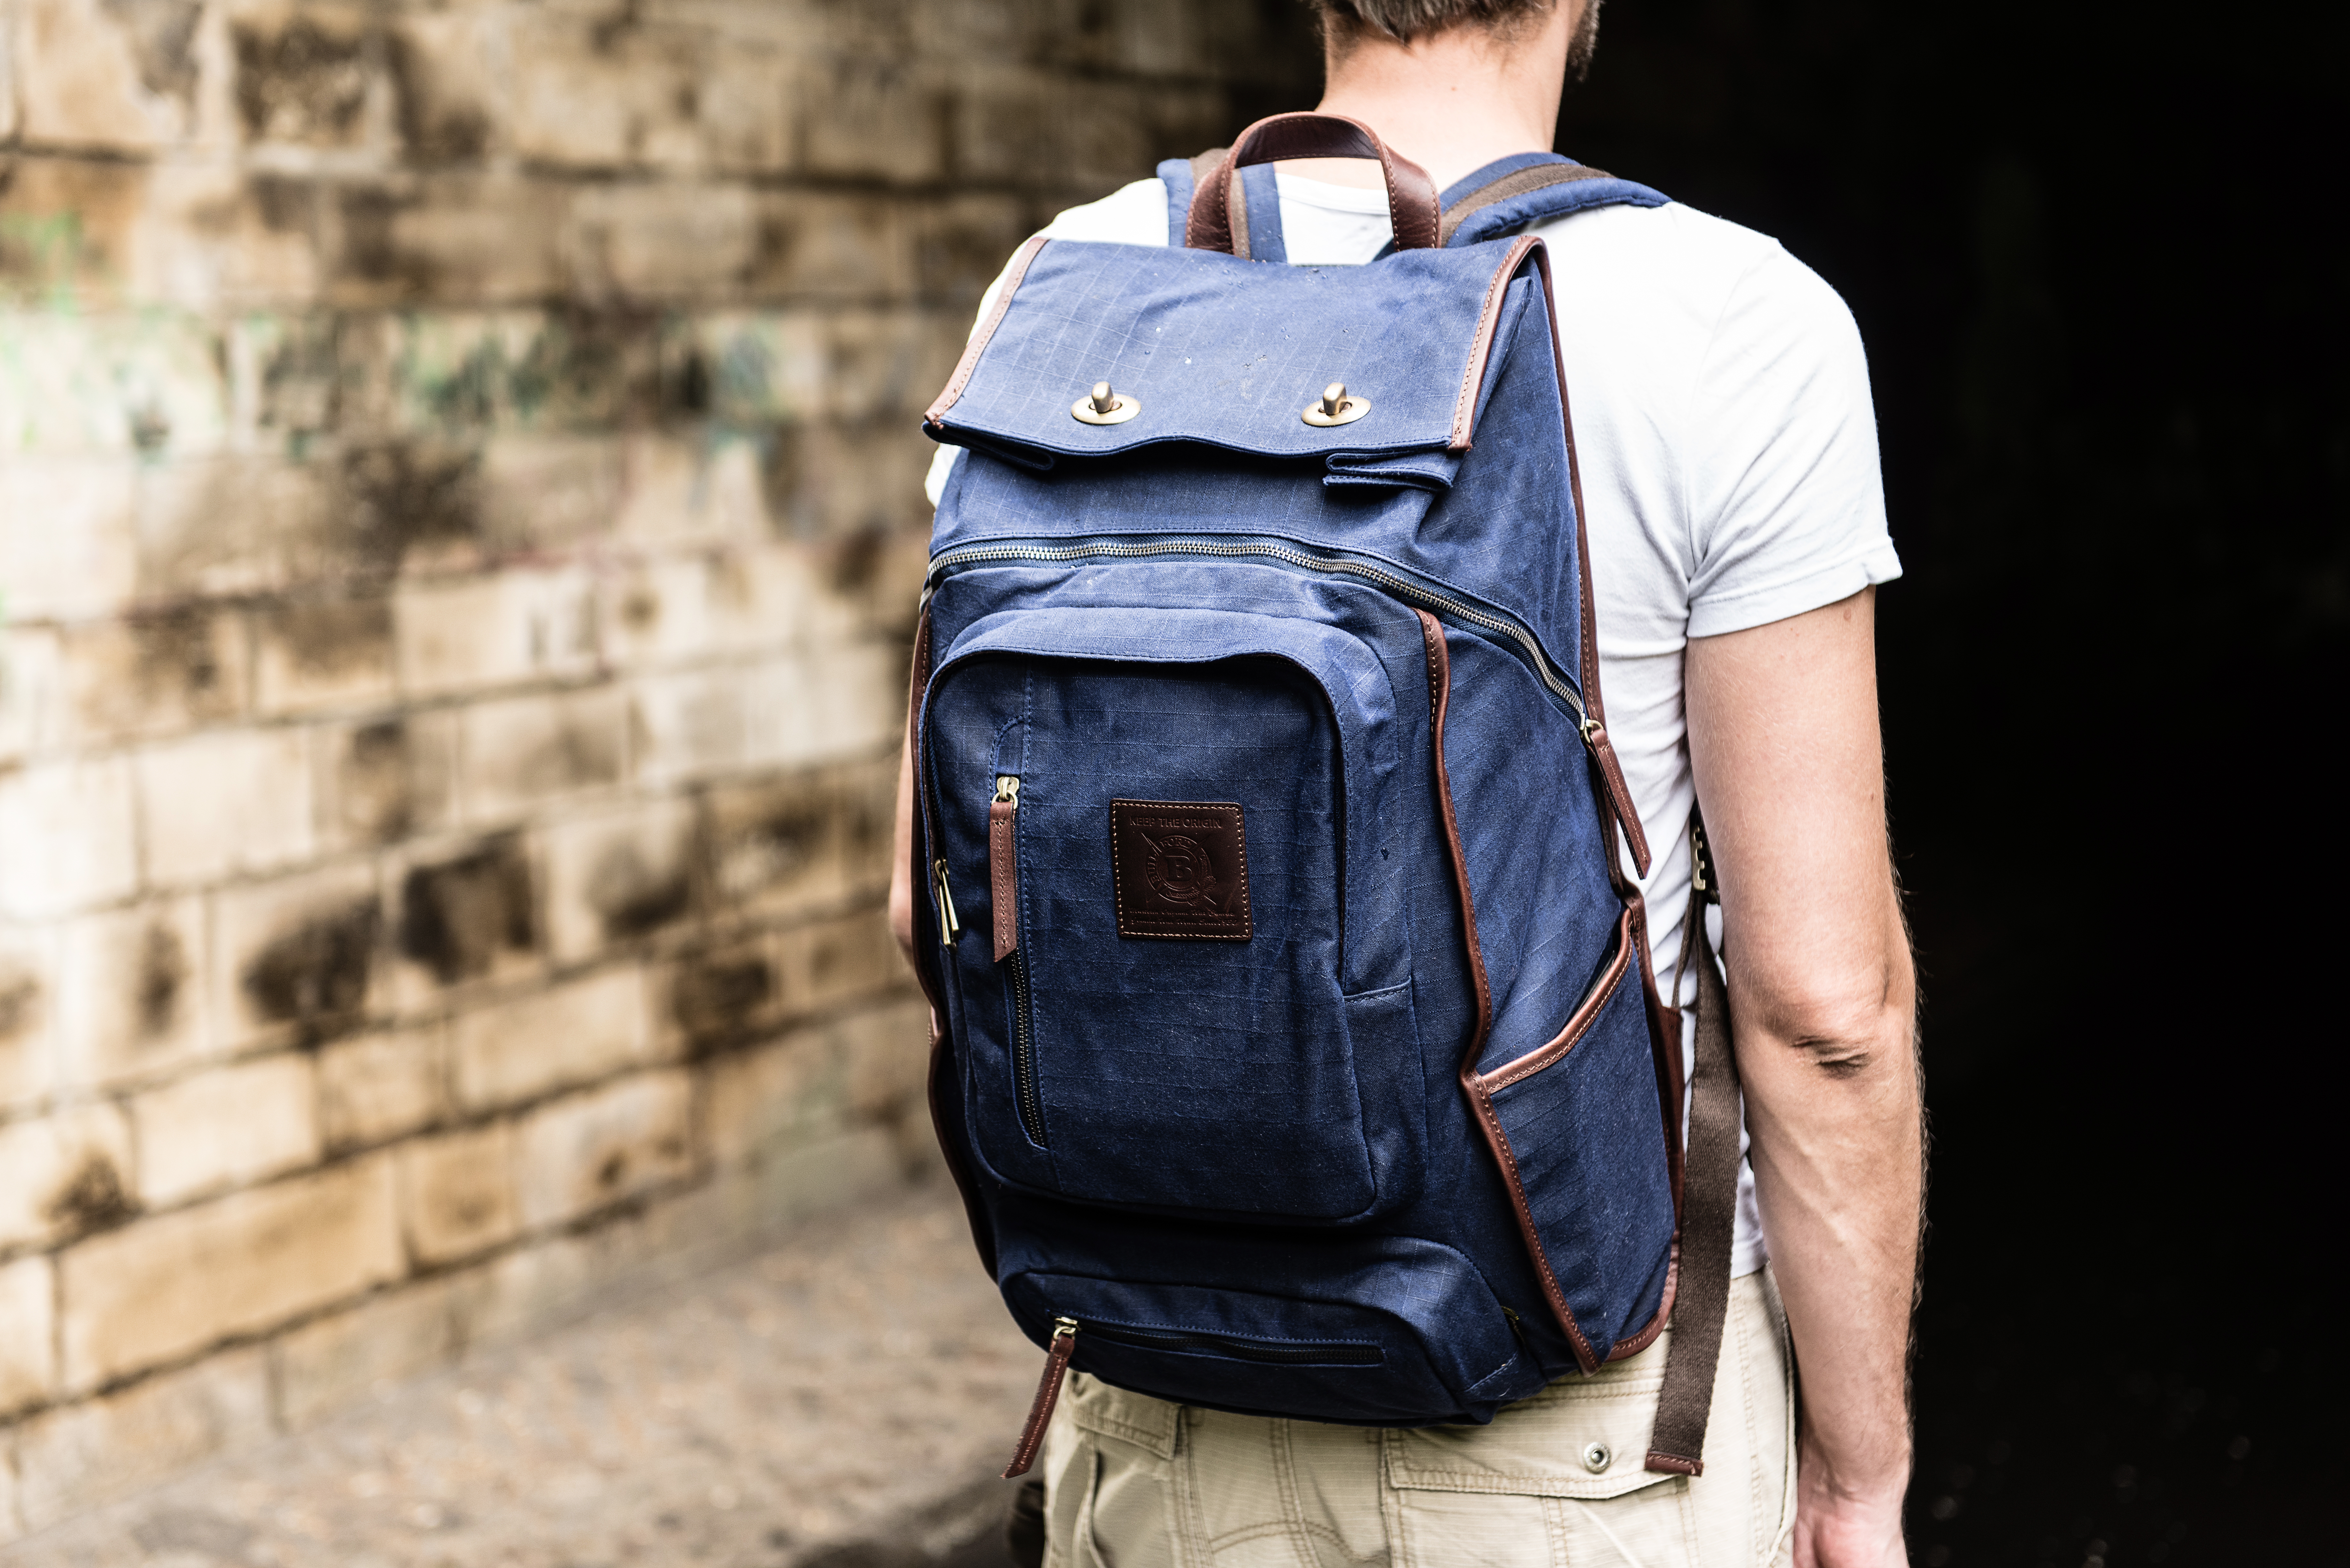 waxed canvas backpack good for camping and trekking